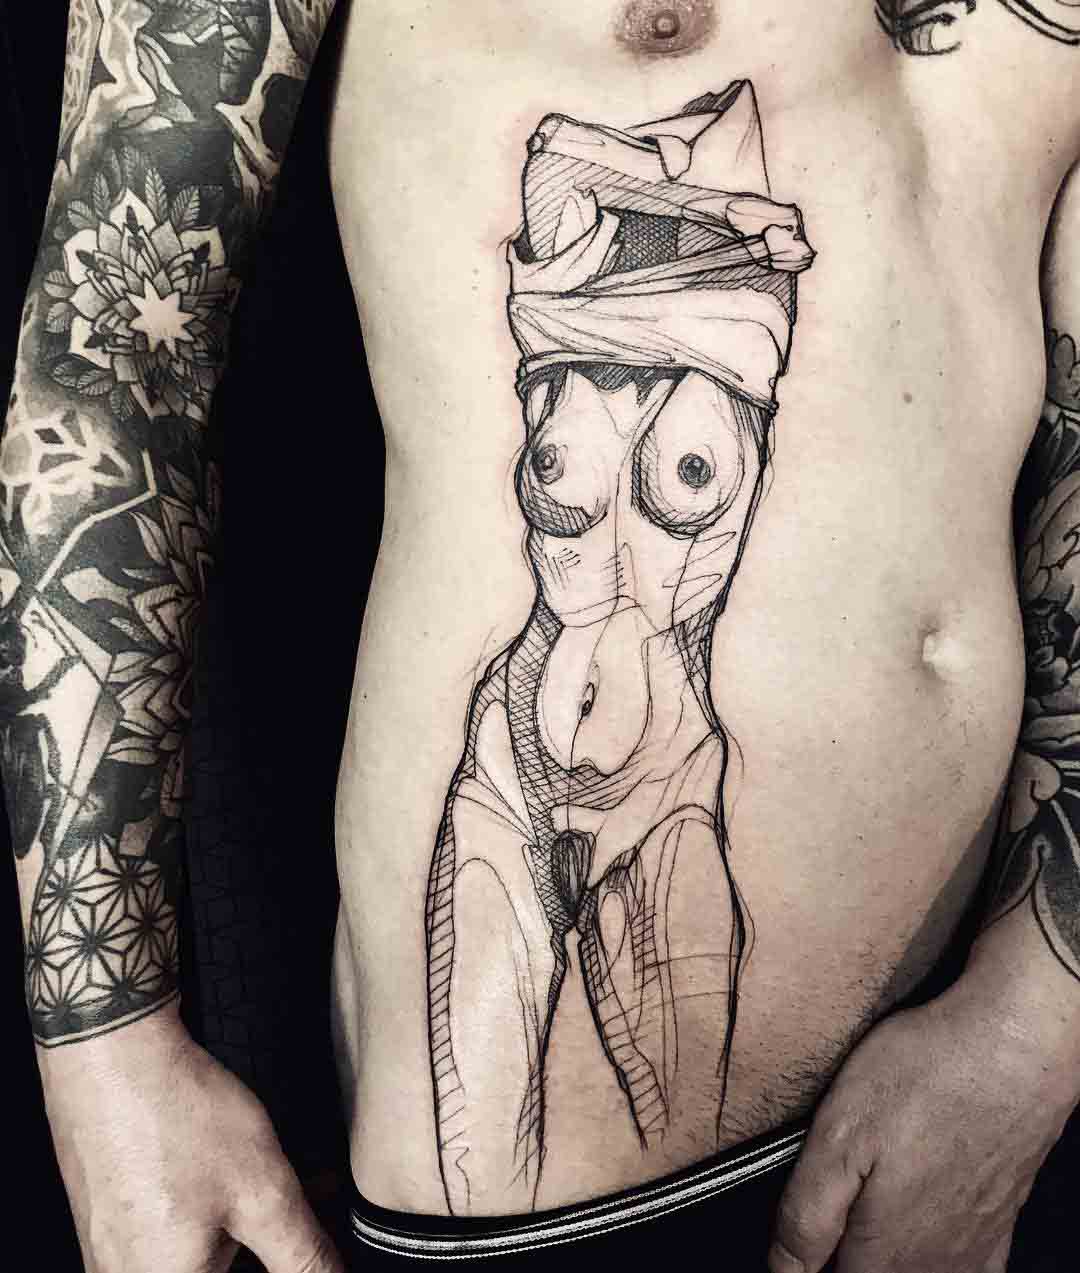 taking off clothes tattoo on stomach